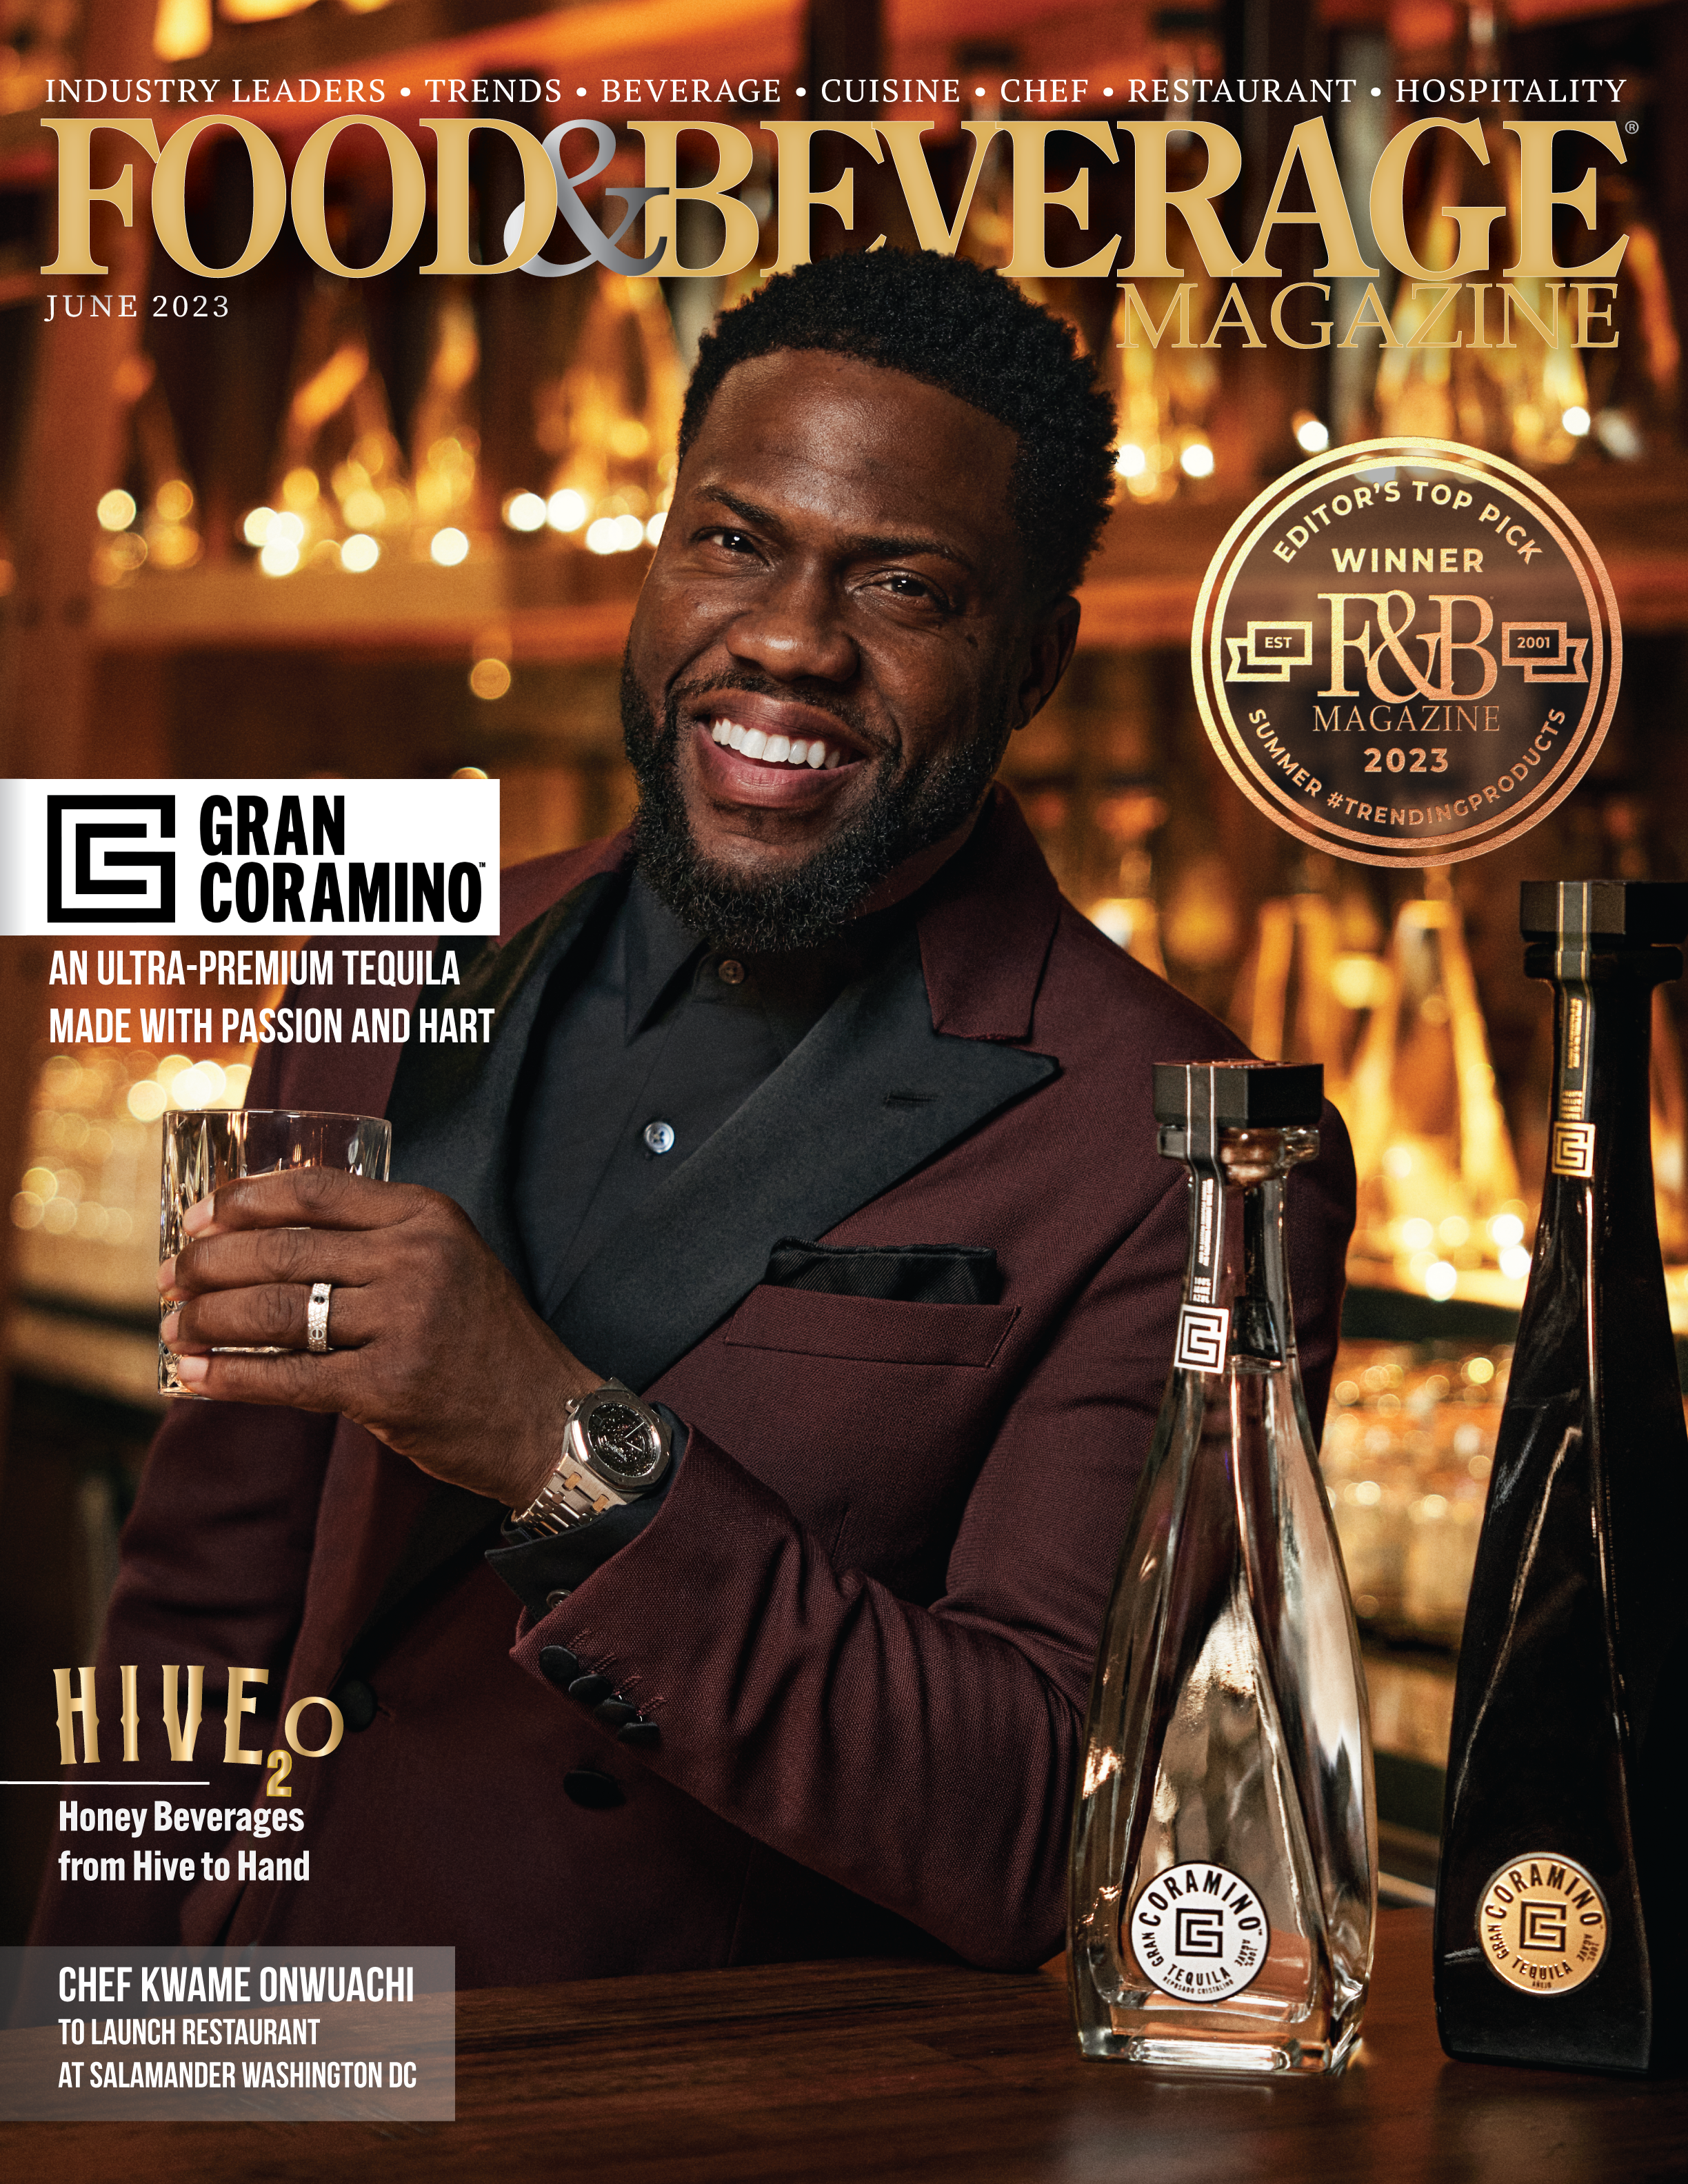 Keven Hart Covers Food & Beverage Magazine Celebrating the release of his Gran Coramino Tequila Launch